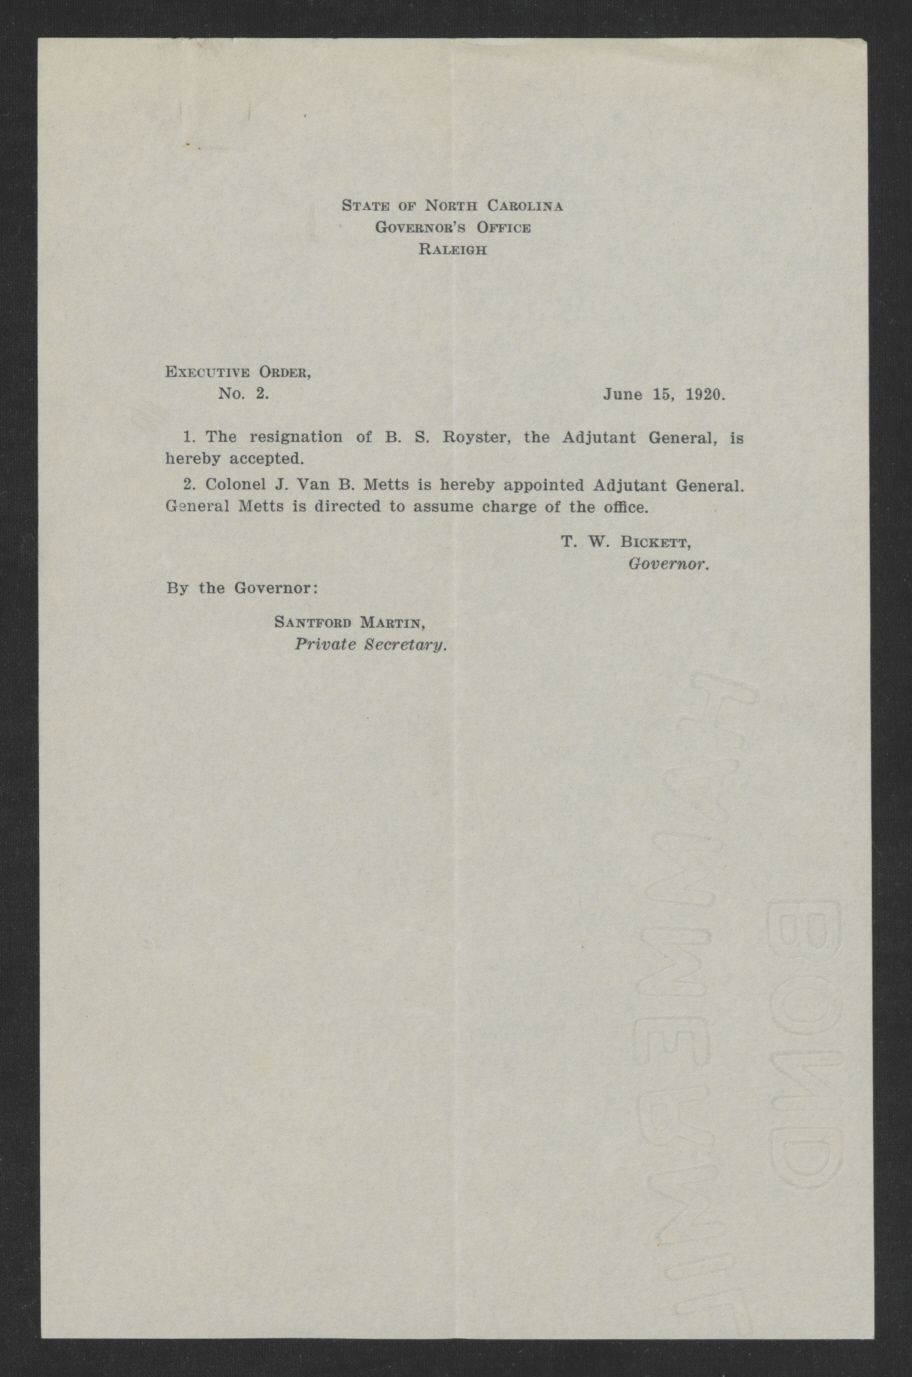 Executive Order No. 2 by Governor Thomas W. Bickett, June 15, 1920